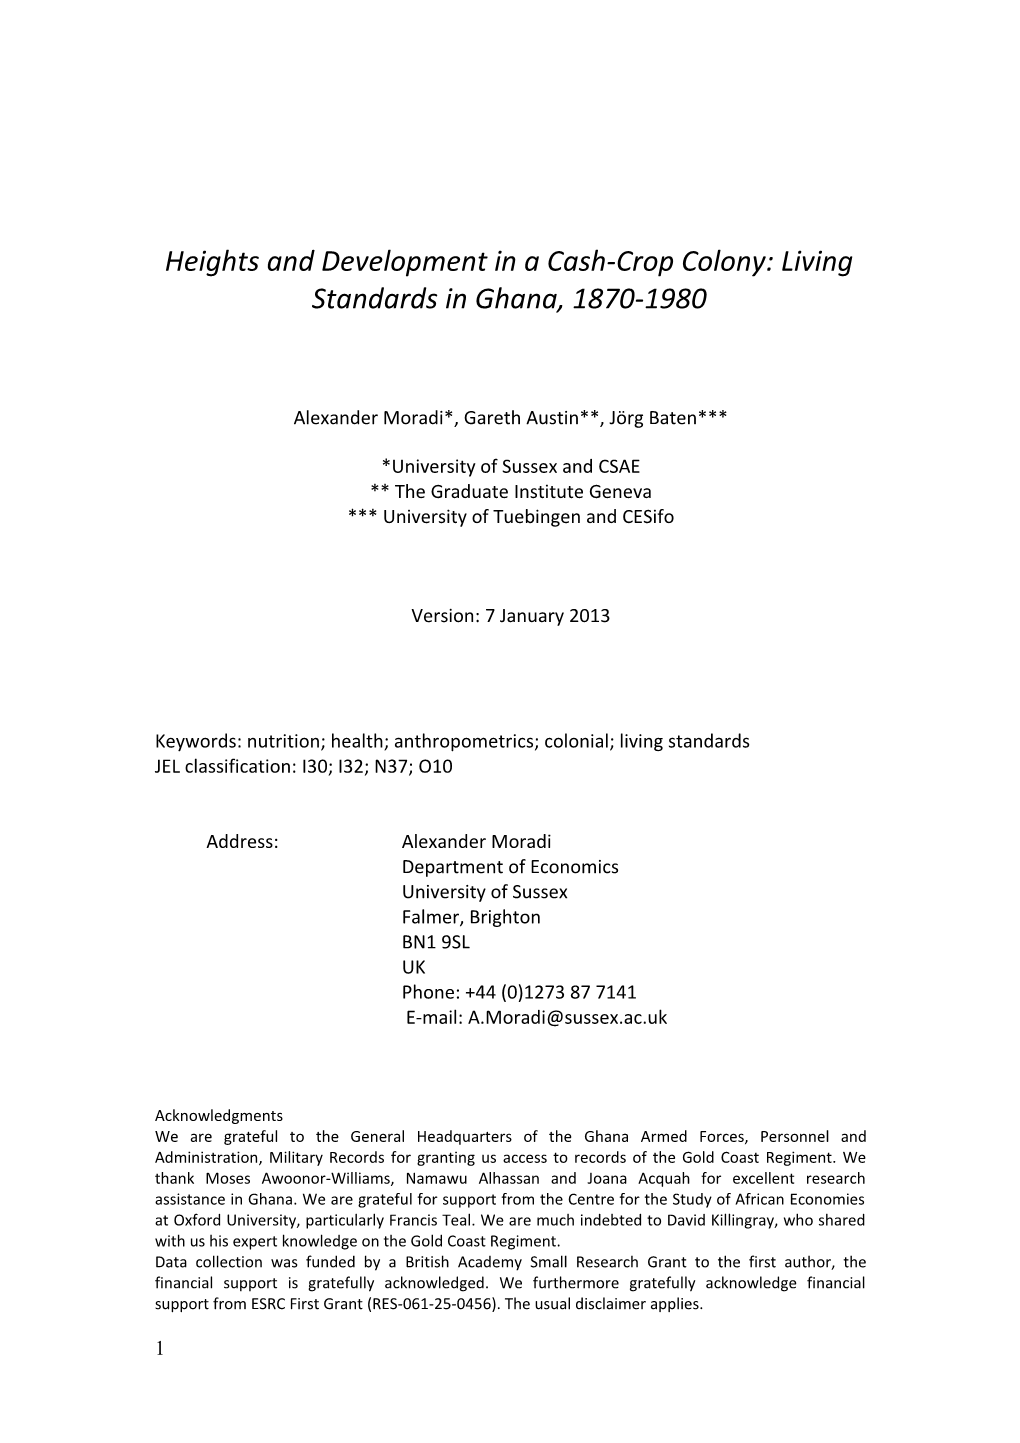 Heights and Development in a Cash-Crop Colony: Living Standards in Ghana, 1870-1980